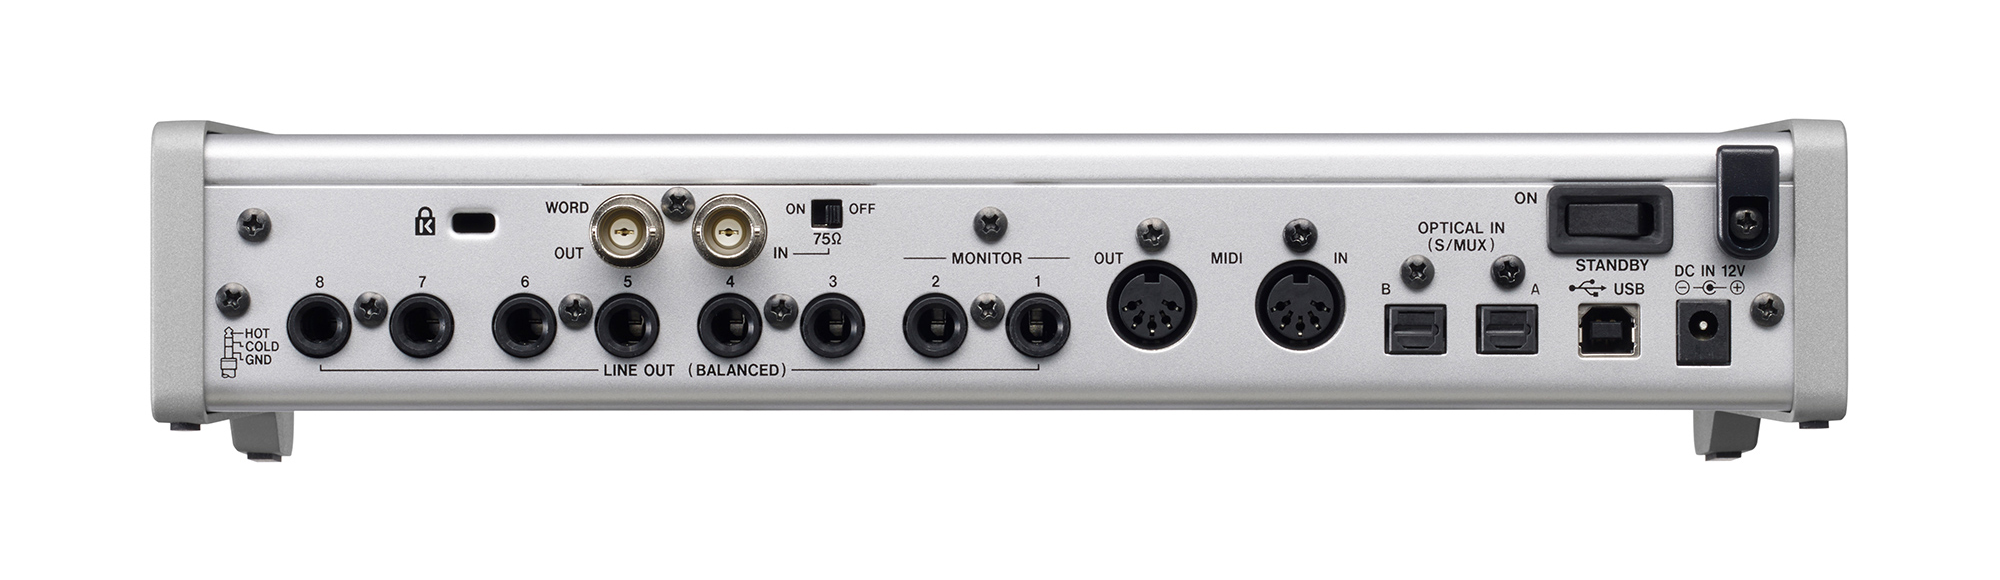 SERIES 208i | 20 IN/8 OUT USB Audio/MIDI Interface | TASCAM (日本)